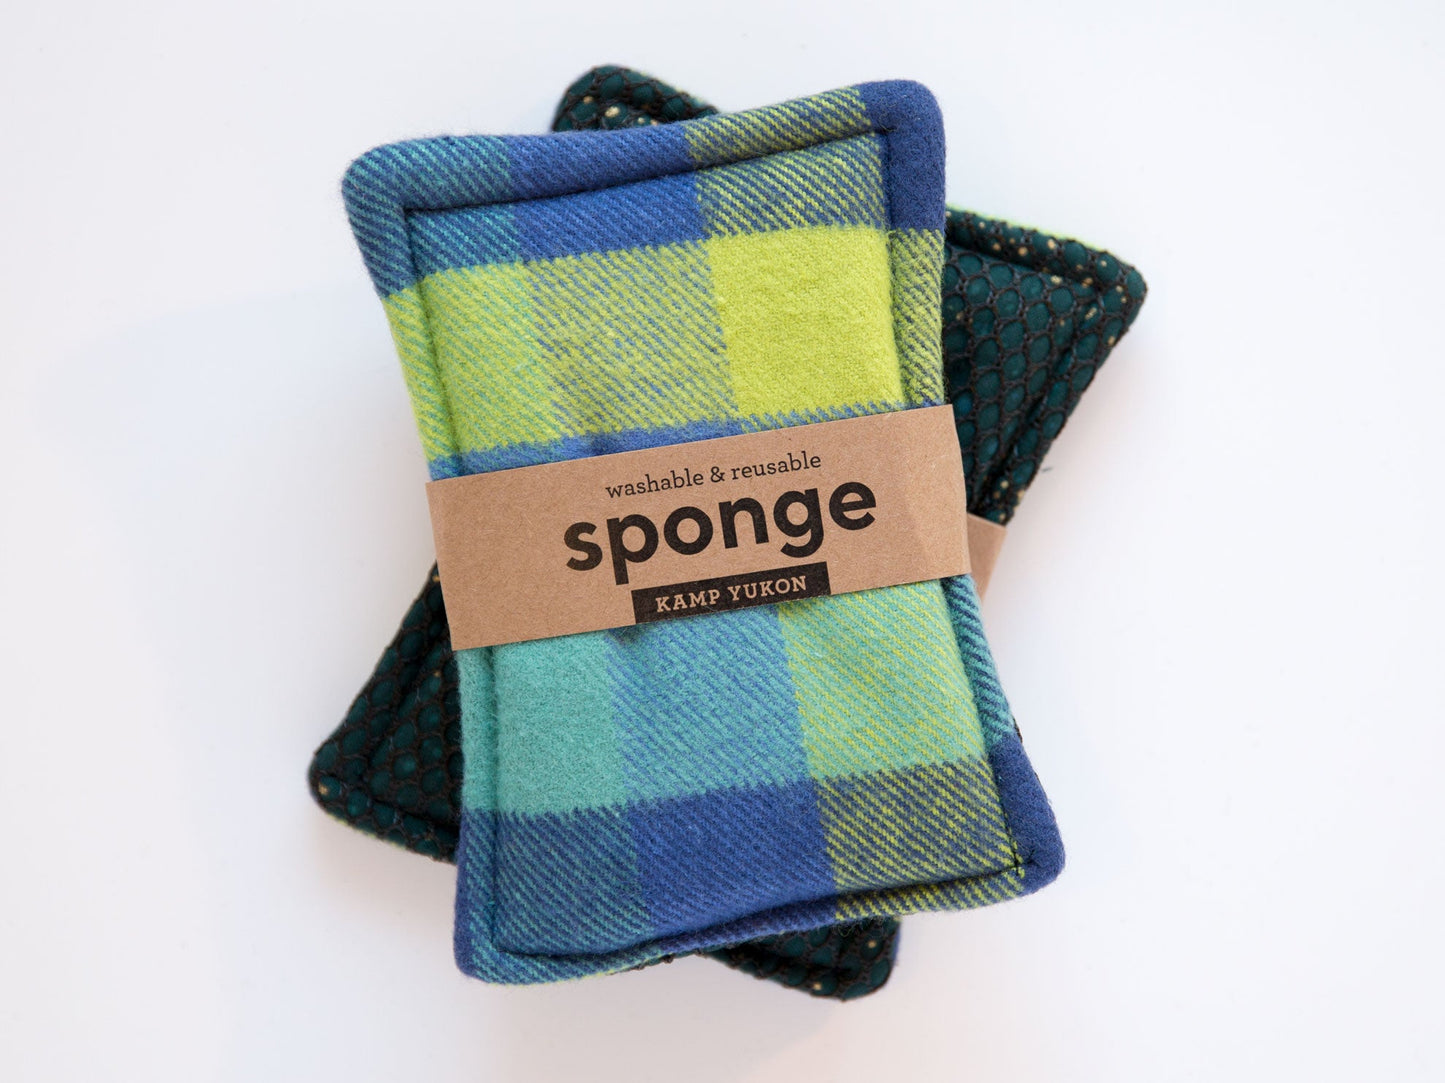 flannel sponge with green and blue plaid